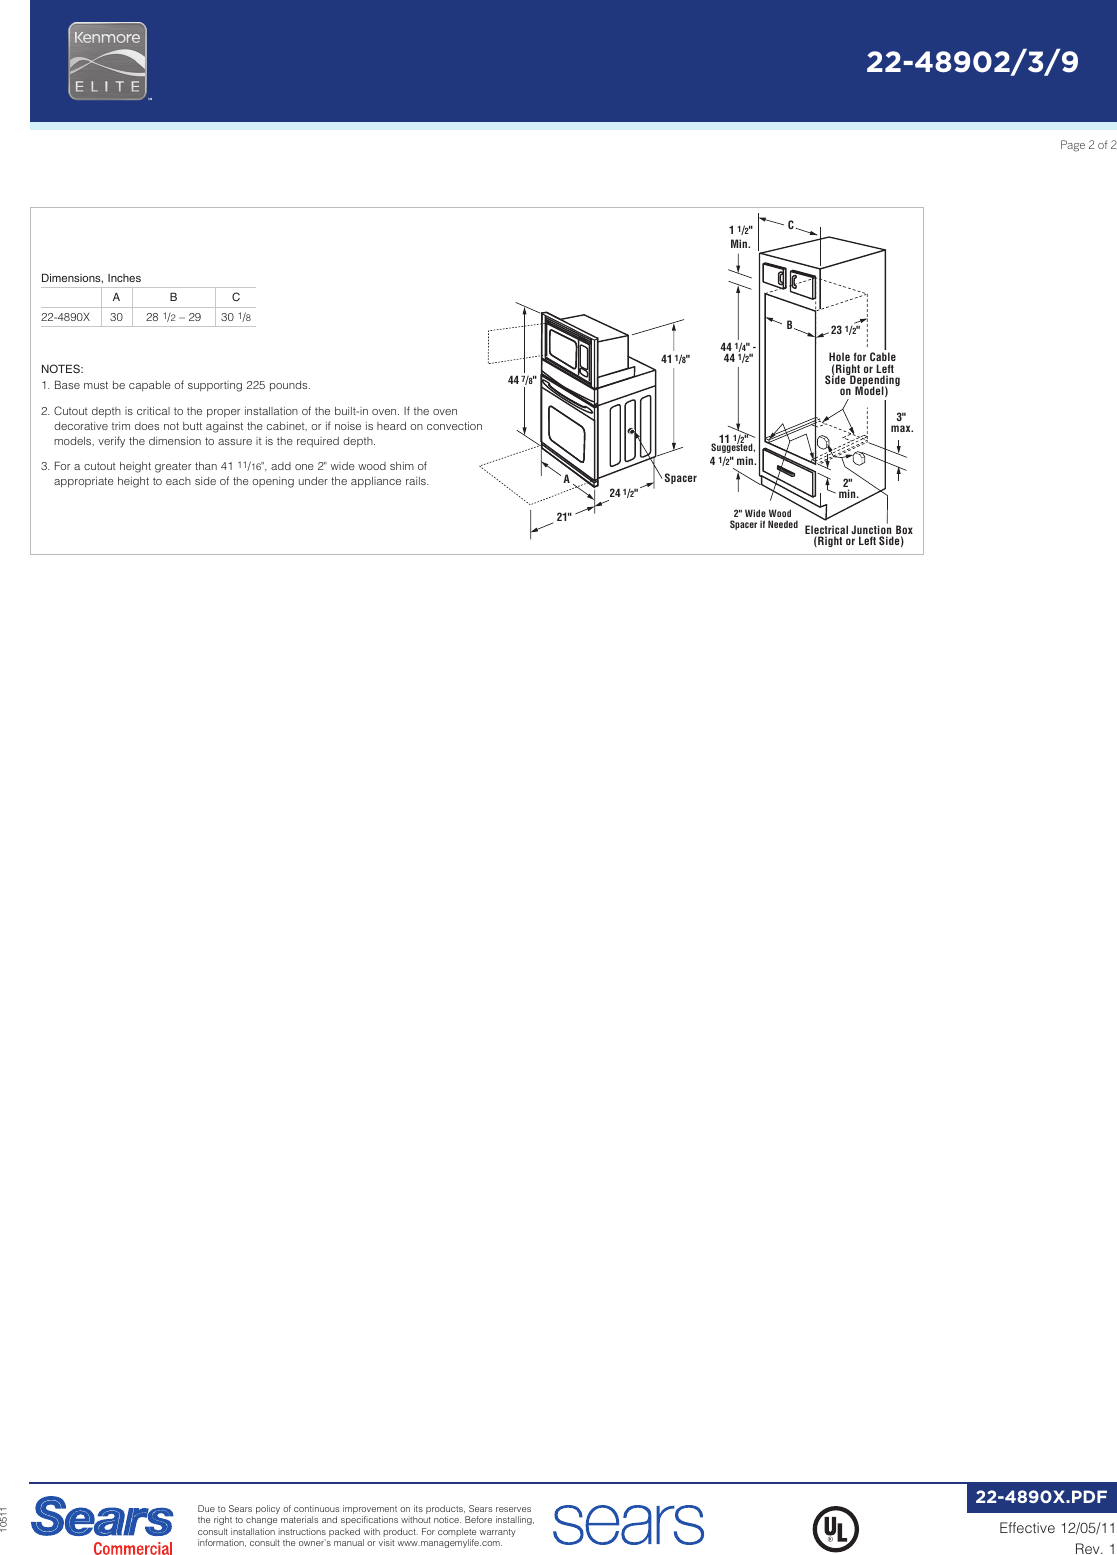 Page 2 of 2 - Kenmore Kenmore-Kenmore-Elite-30-Electric-Combination-Wall-Oven-W-Convection-Specifications-  Kenmore-kenmore-elite-30-electric-combination-wall-oven-w-convection-specifications